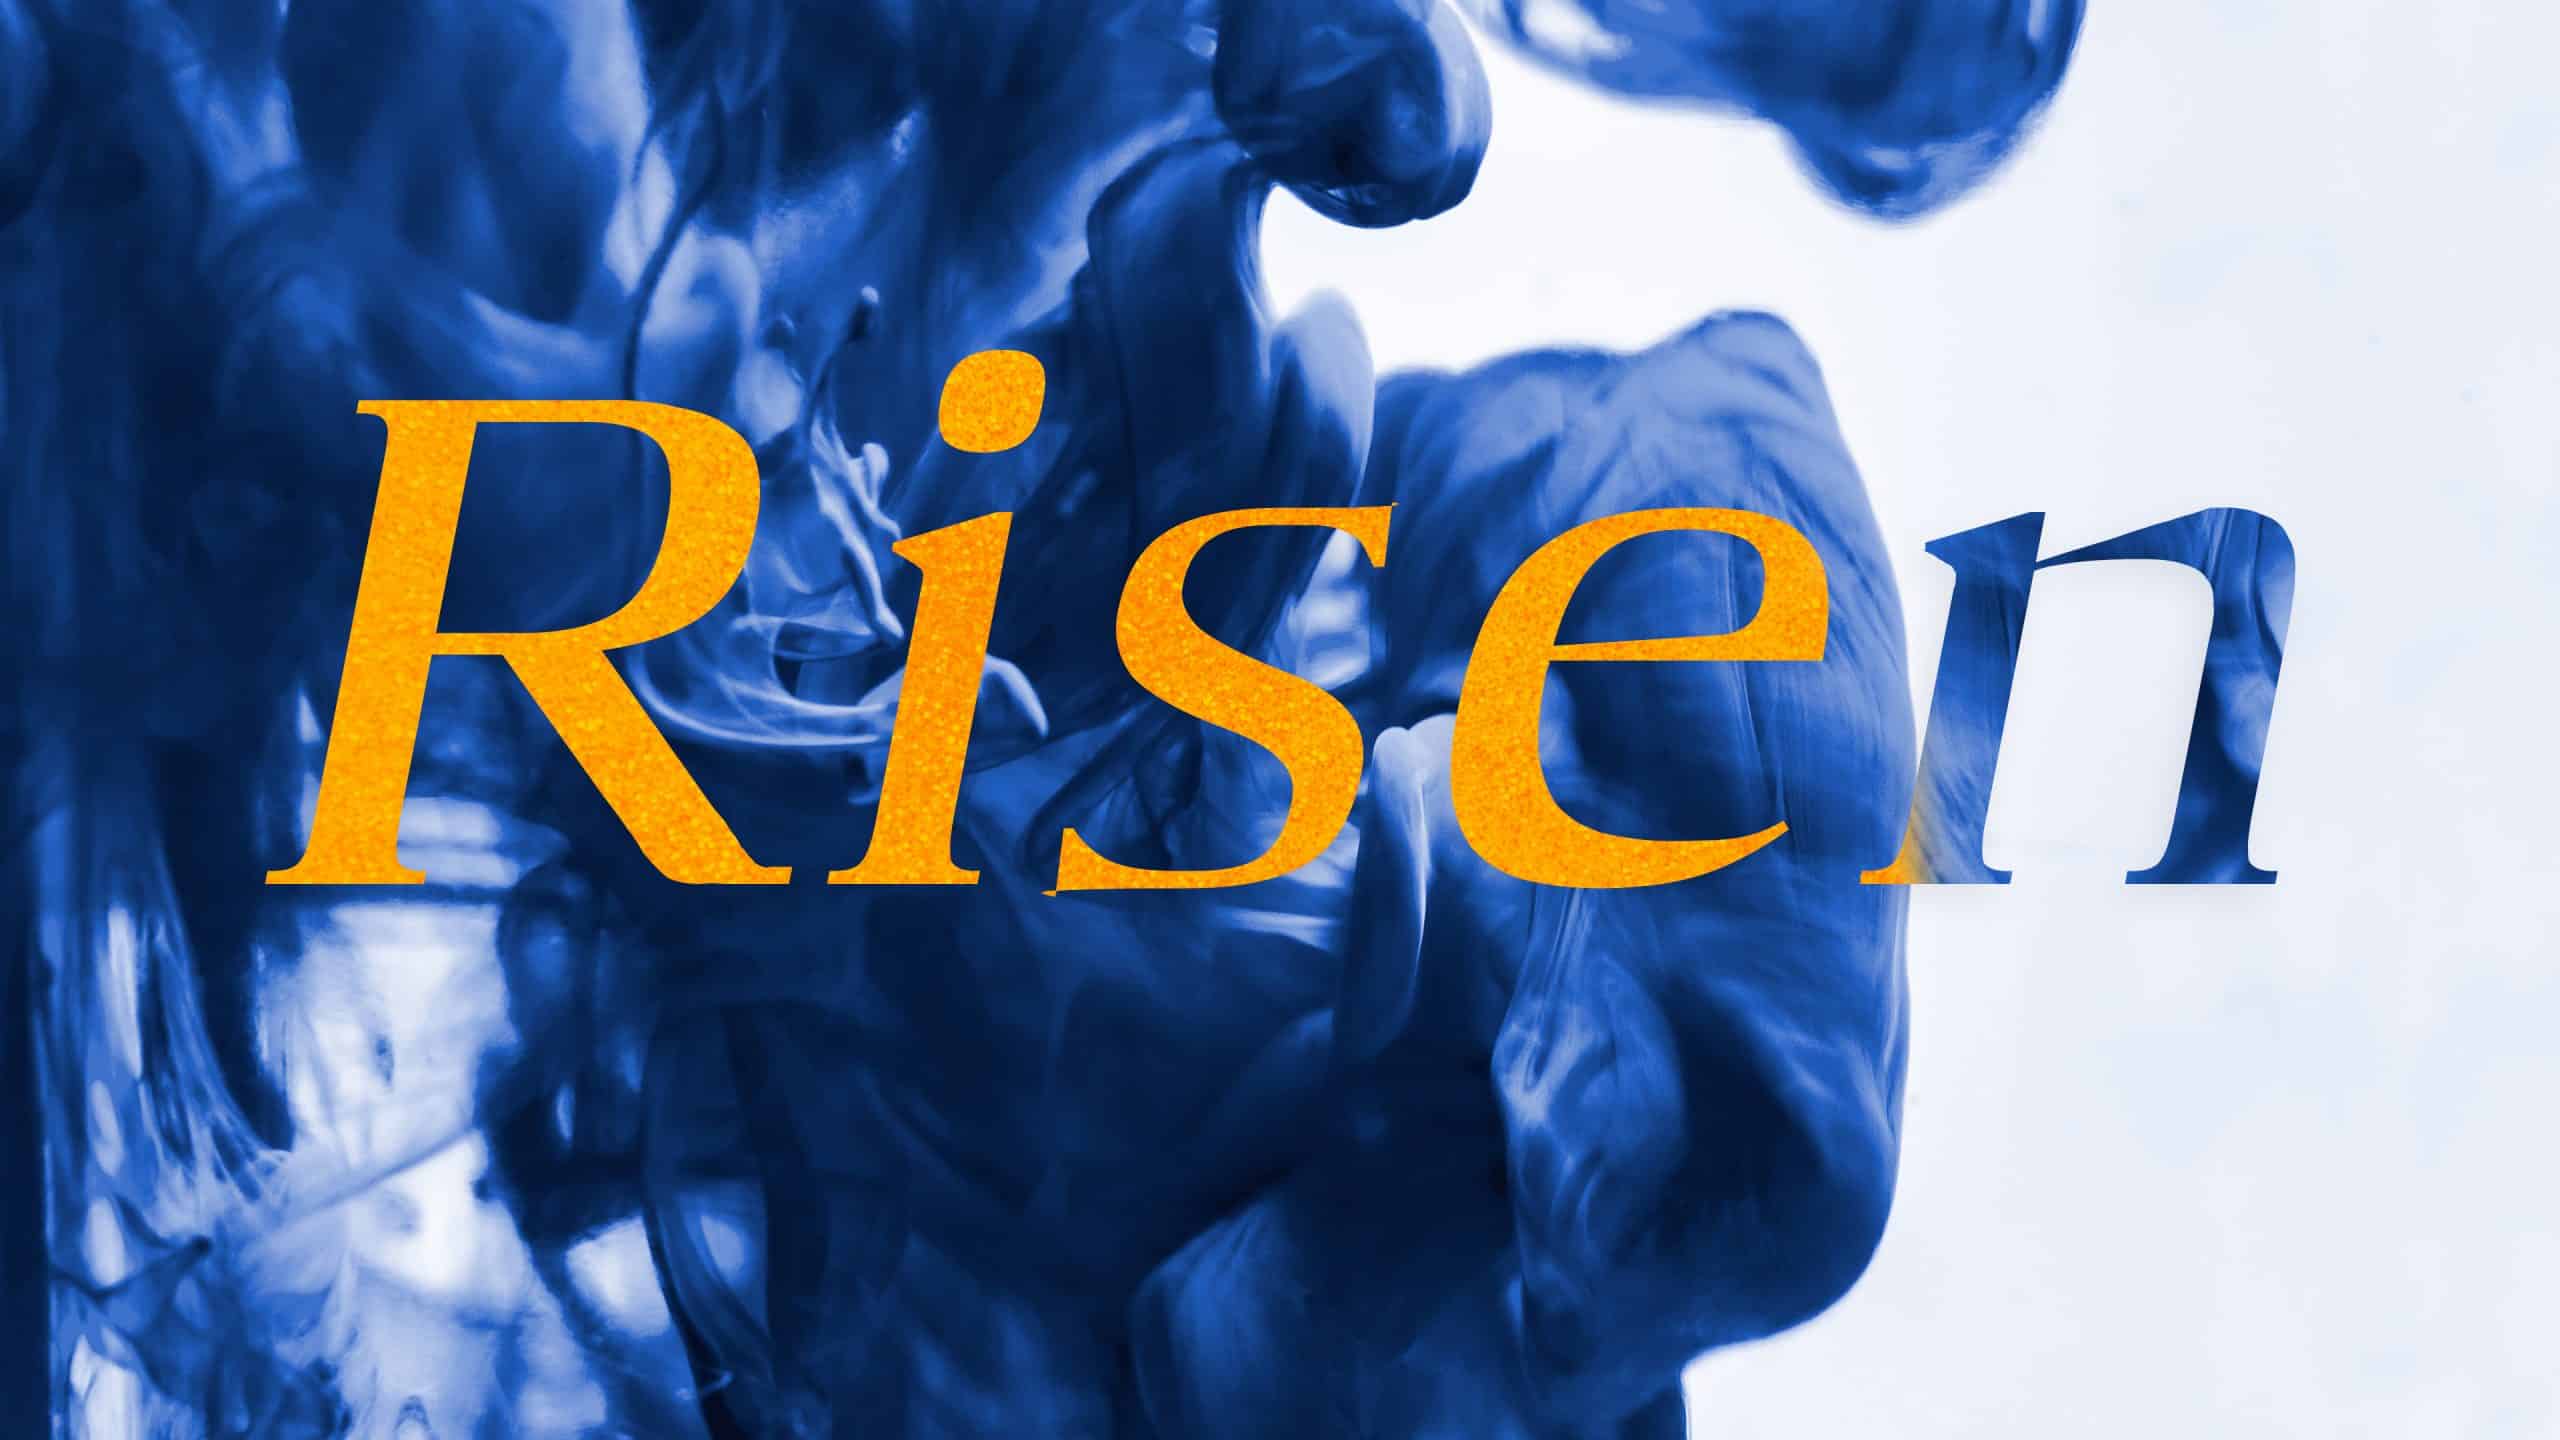 Featured image for “Risen”